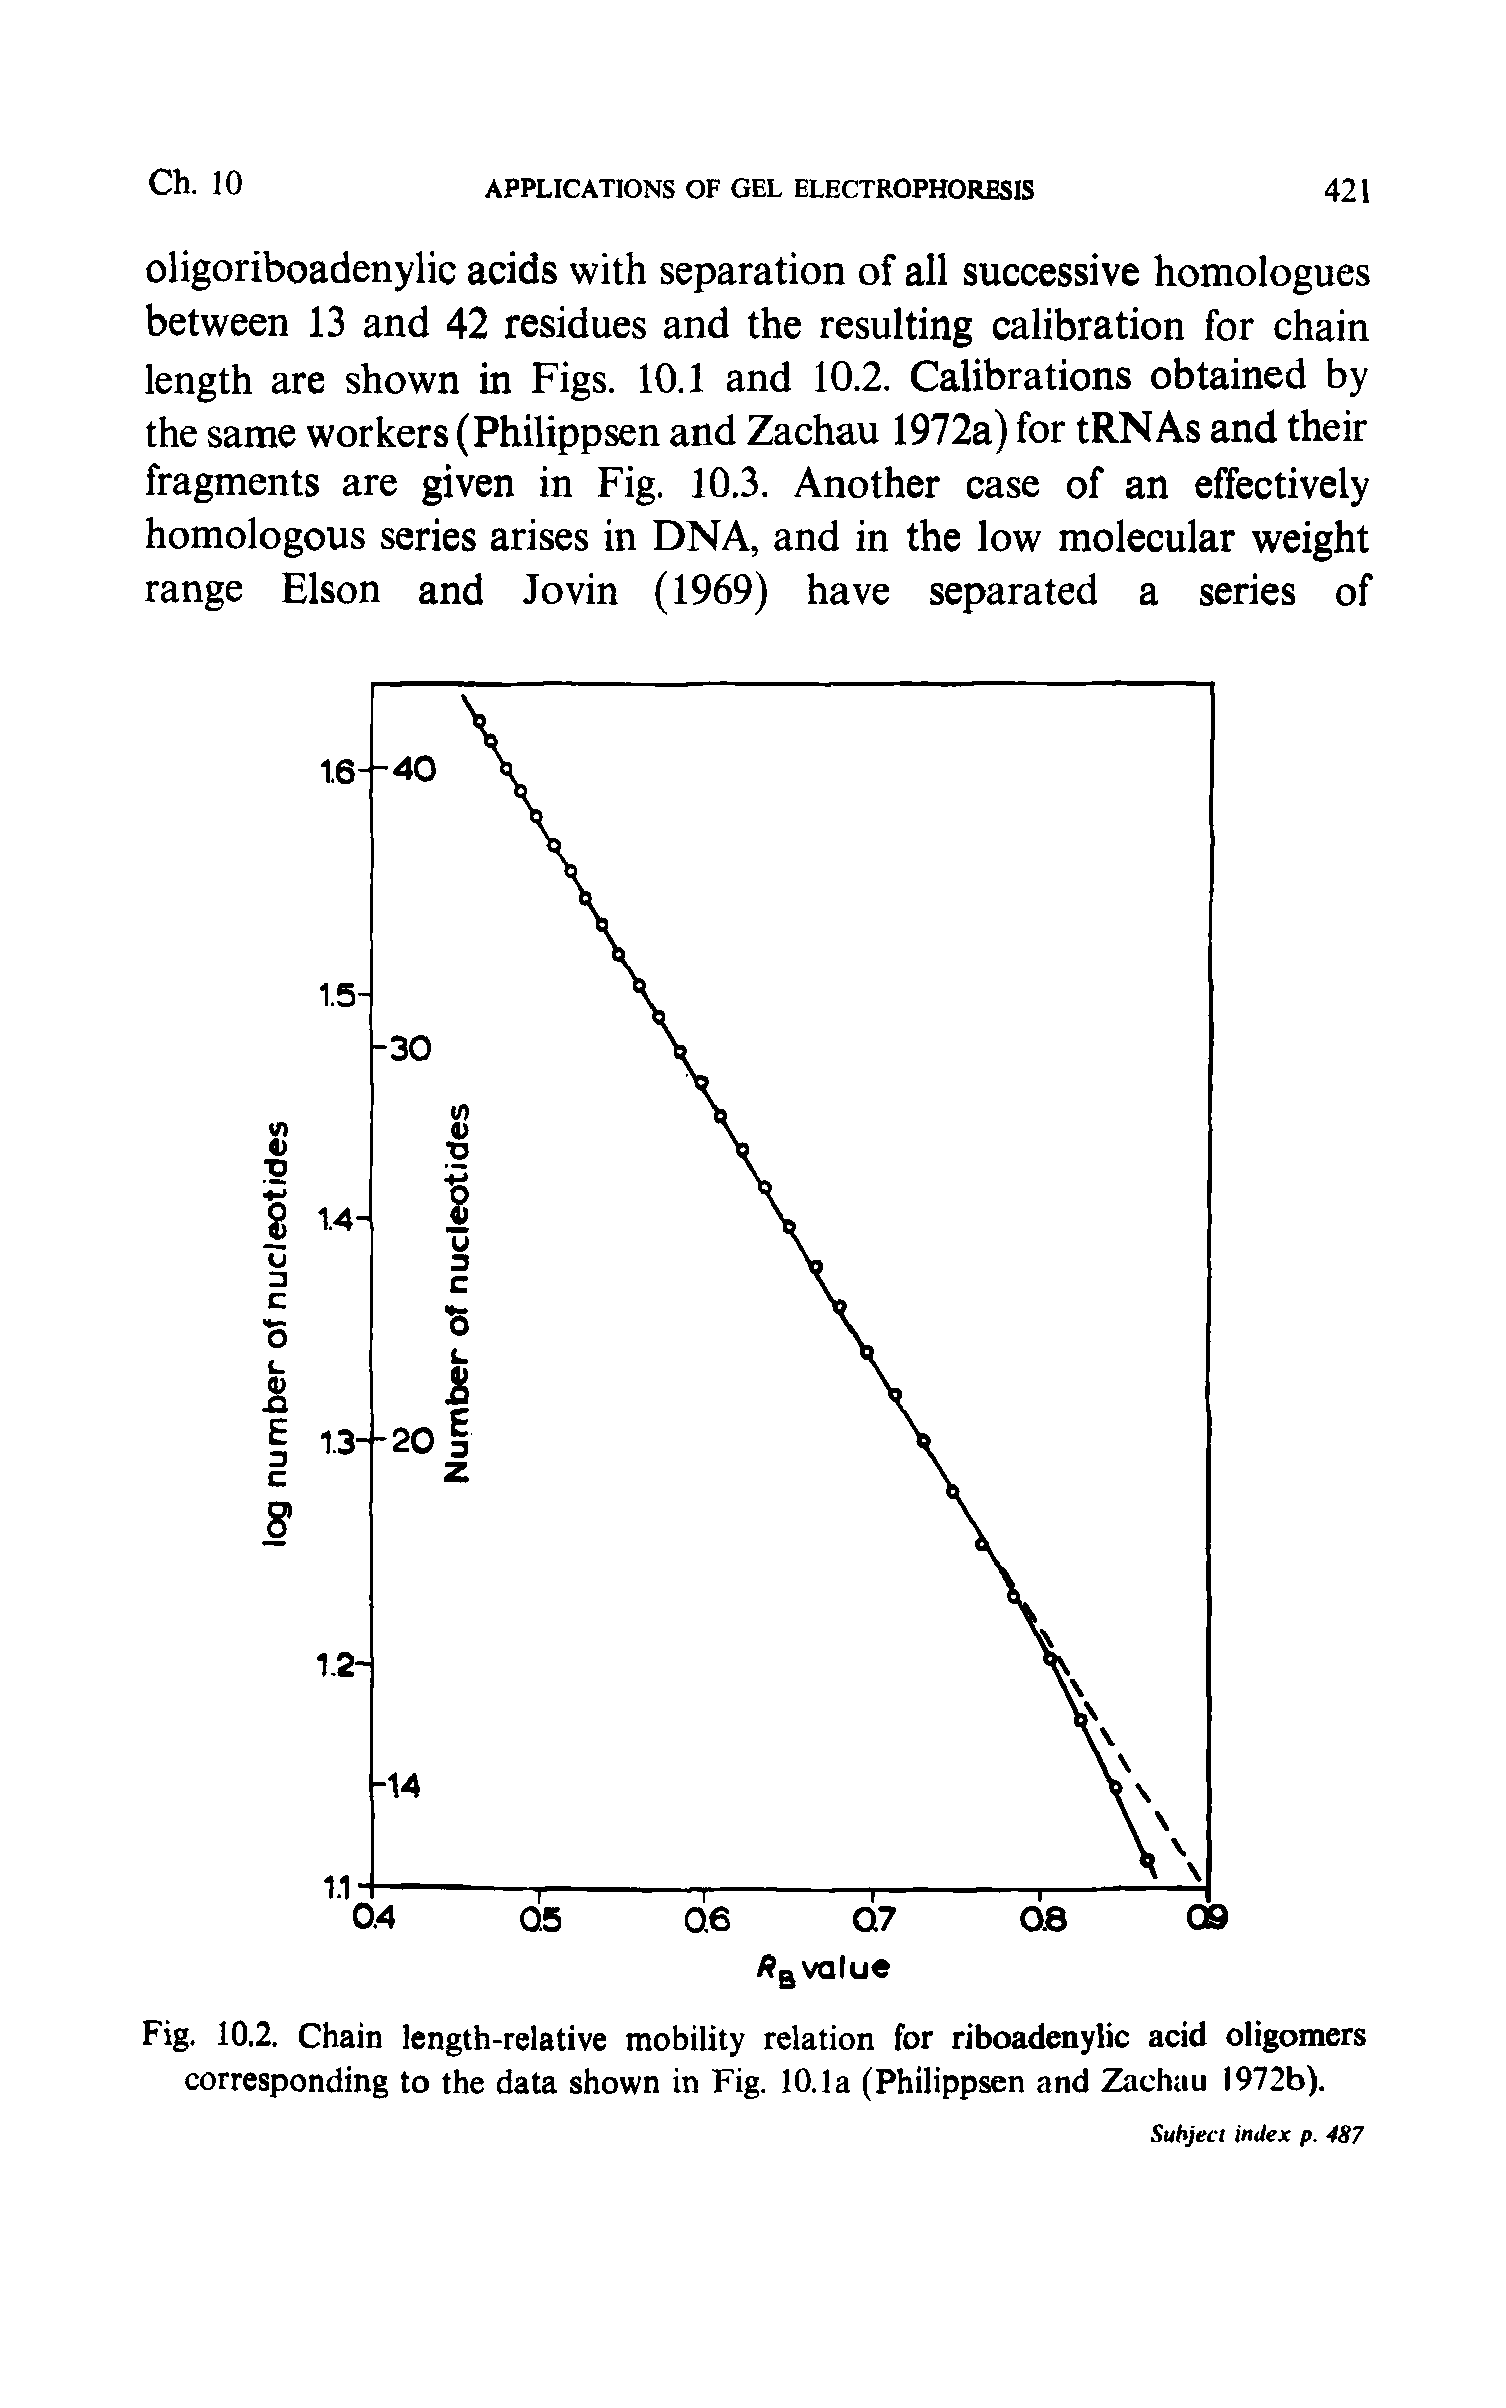 Fig. 10.2. Chain length-relative mobility relation for riboadenylic acid oligomers corresponding to the data shown in Fig. 10.1a (Philippsen and Zachau 1972b).